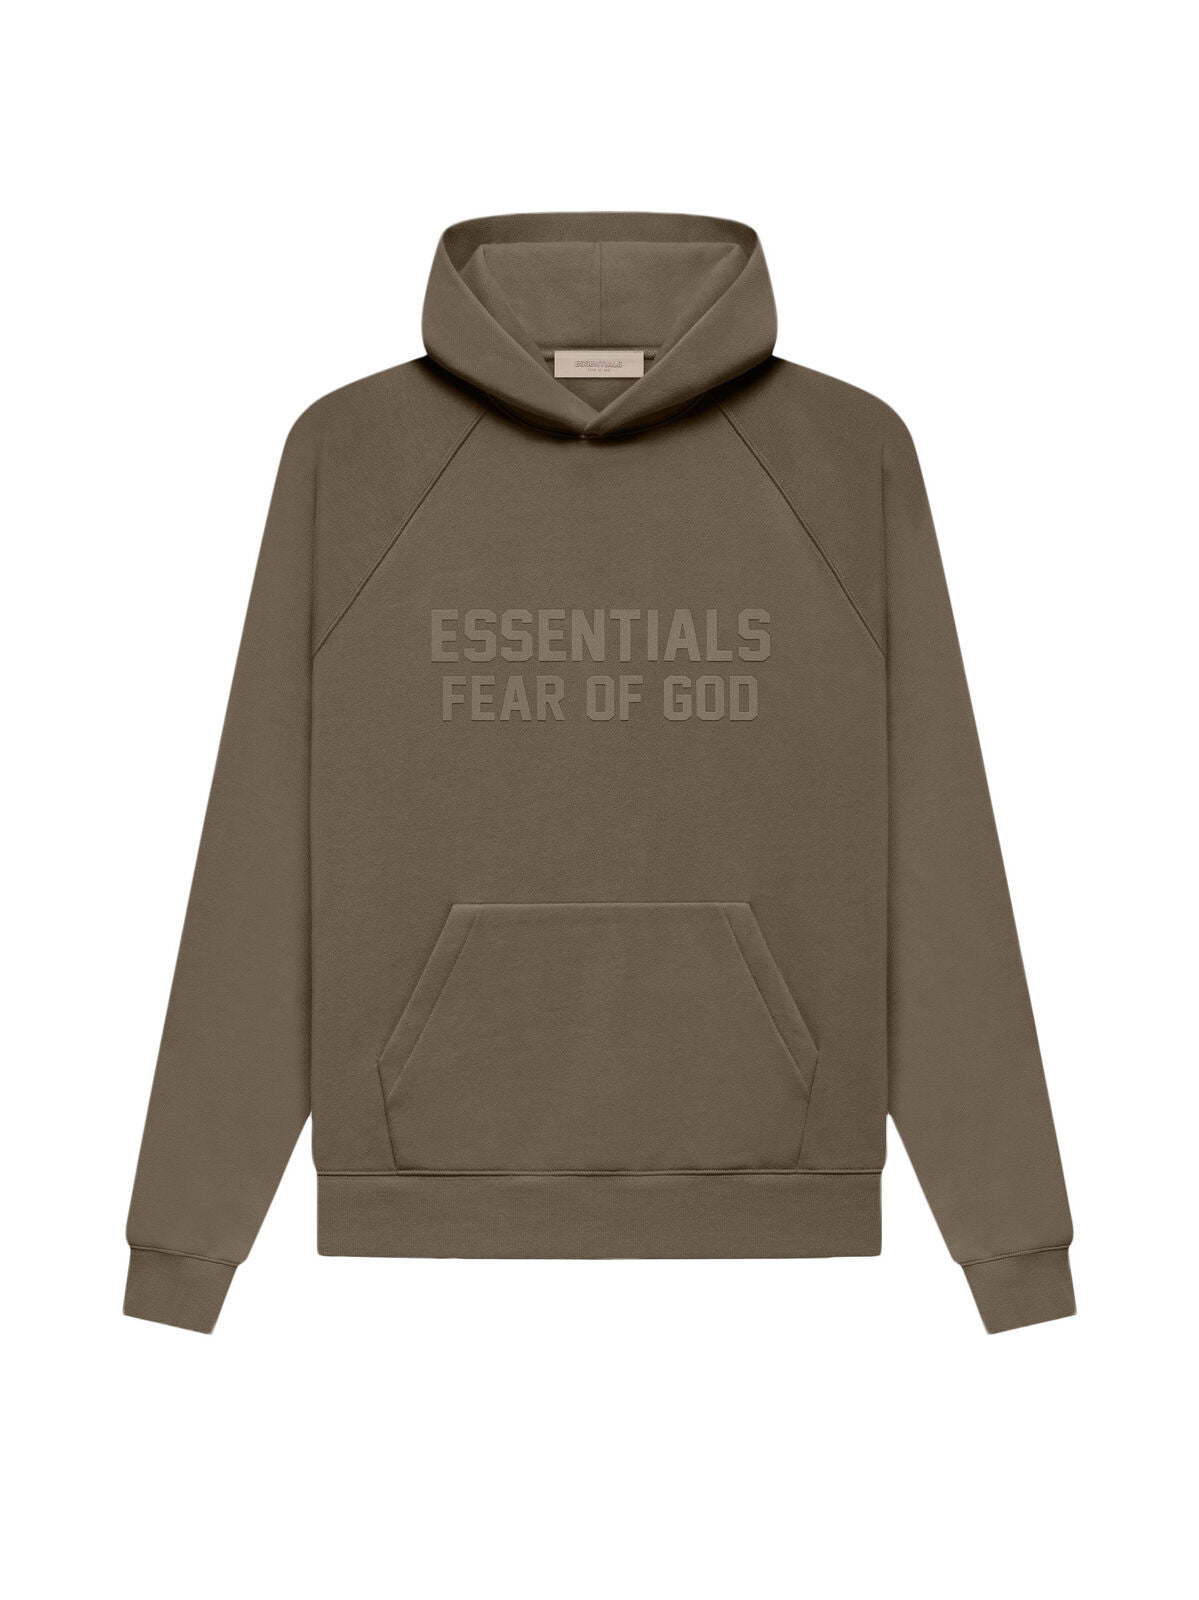 Fear of God Essentials Hoodie Wood Mens Size XS